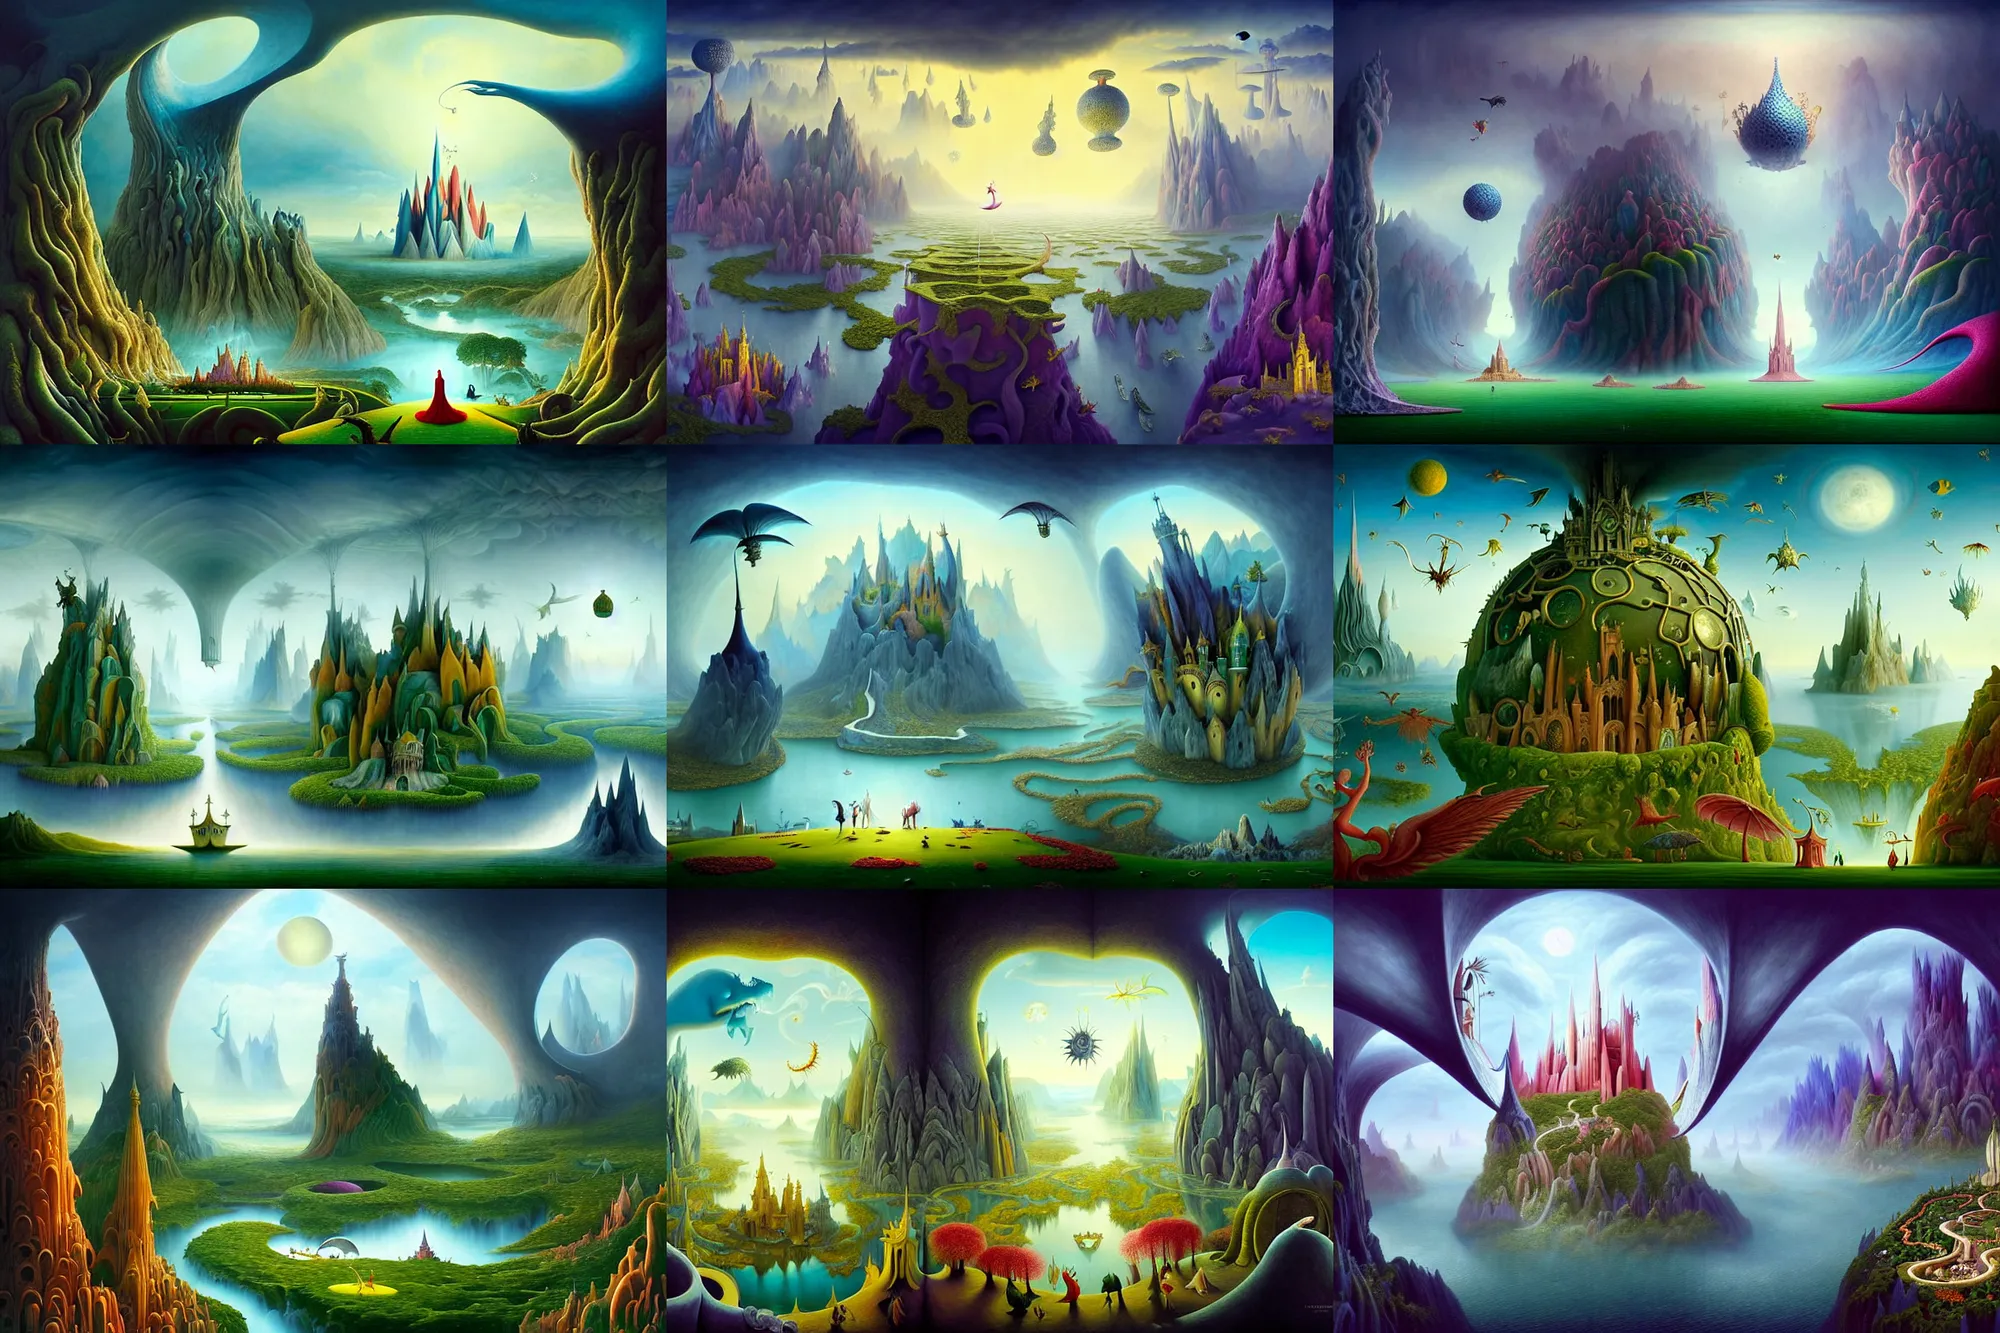 Prompt: a beguiling epic stunning beautiful and insanely detailed matte painting of windows into dream worlds with surreal architecture designed by Heironymous Bosch, dream world populated with mythical whimsical creatures, mega structures inspired by Heironymous Bosch's Garden of Earthly Delights, vast surreal landscape and horizon by Cyril Rolando and Conrad Roset and Andrew Ferez, masterpiece!!!, grand!, imaginative!!!, whimsical!!, epic scale, intricate details, sense of awe, elite, wonder, insanely complex, masterful composition!!!, sharp focus, fantasy realism, dramatic lighting